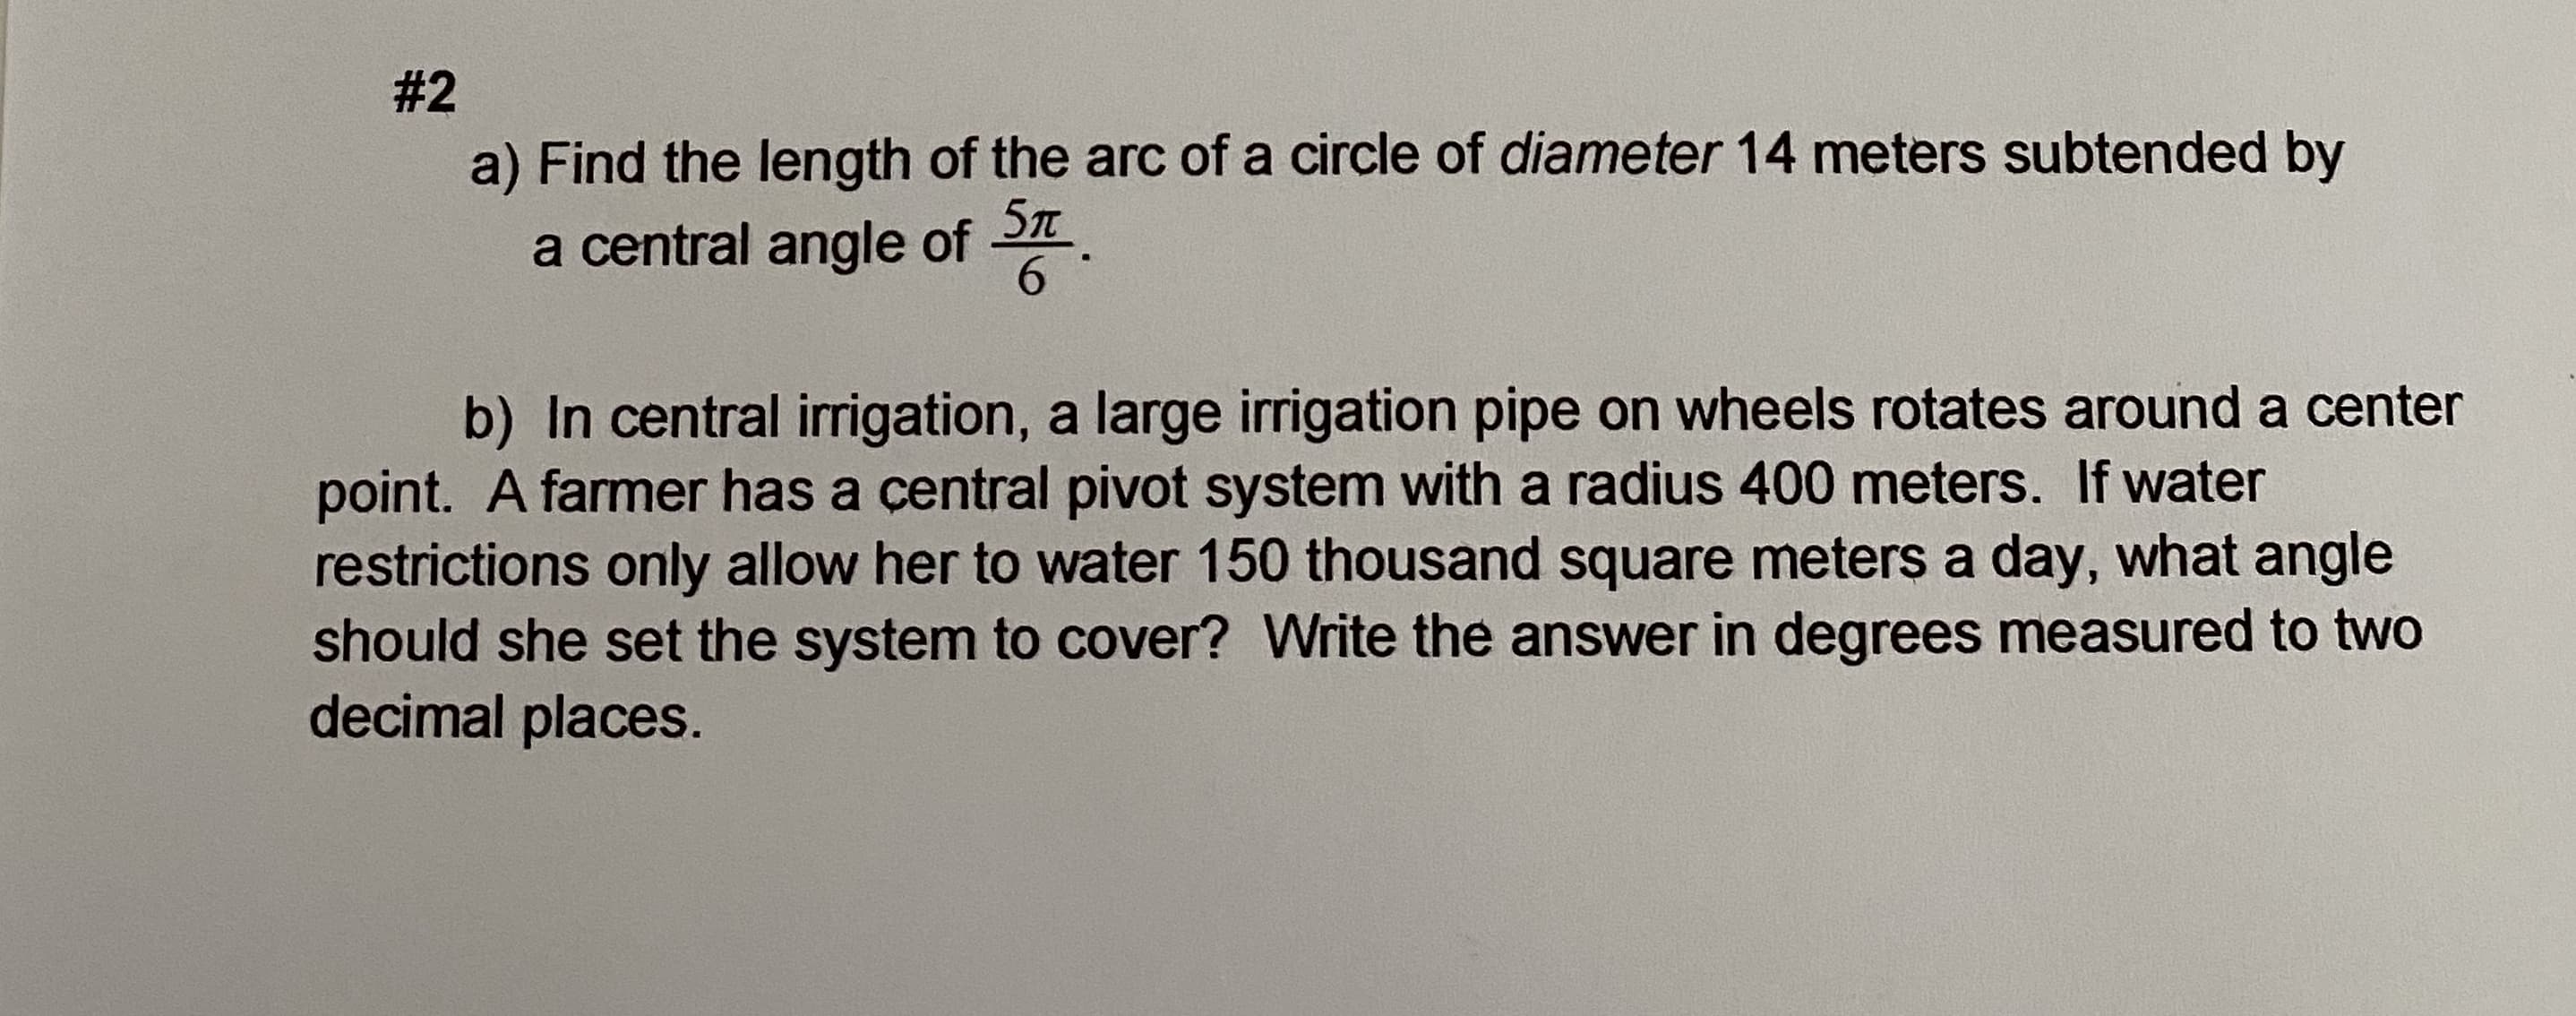 a) Find the length of the arc of a circle of diameter 14 meters subtended by
a central angle of
6.
b) In central irrigation, a large irrigation pipe on wheels rotates around a center
point. A farmer has a çentral pivot system with a radius 400 meters. If water
restrictions only allow her to water 150 thousand square meters a day, what angle
should she set the system to cover? Write the answer in degrees measured to two
decimal places.
